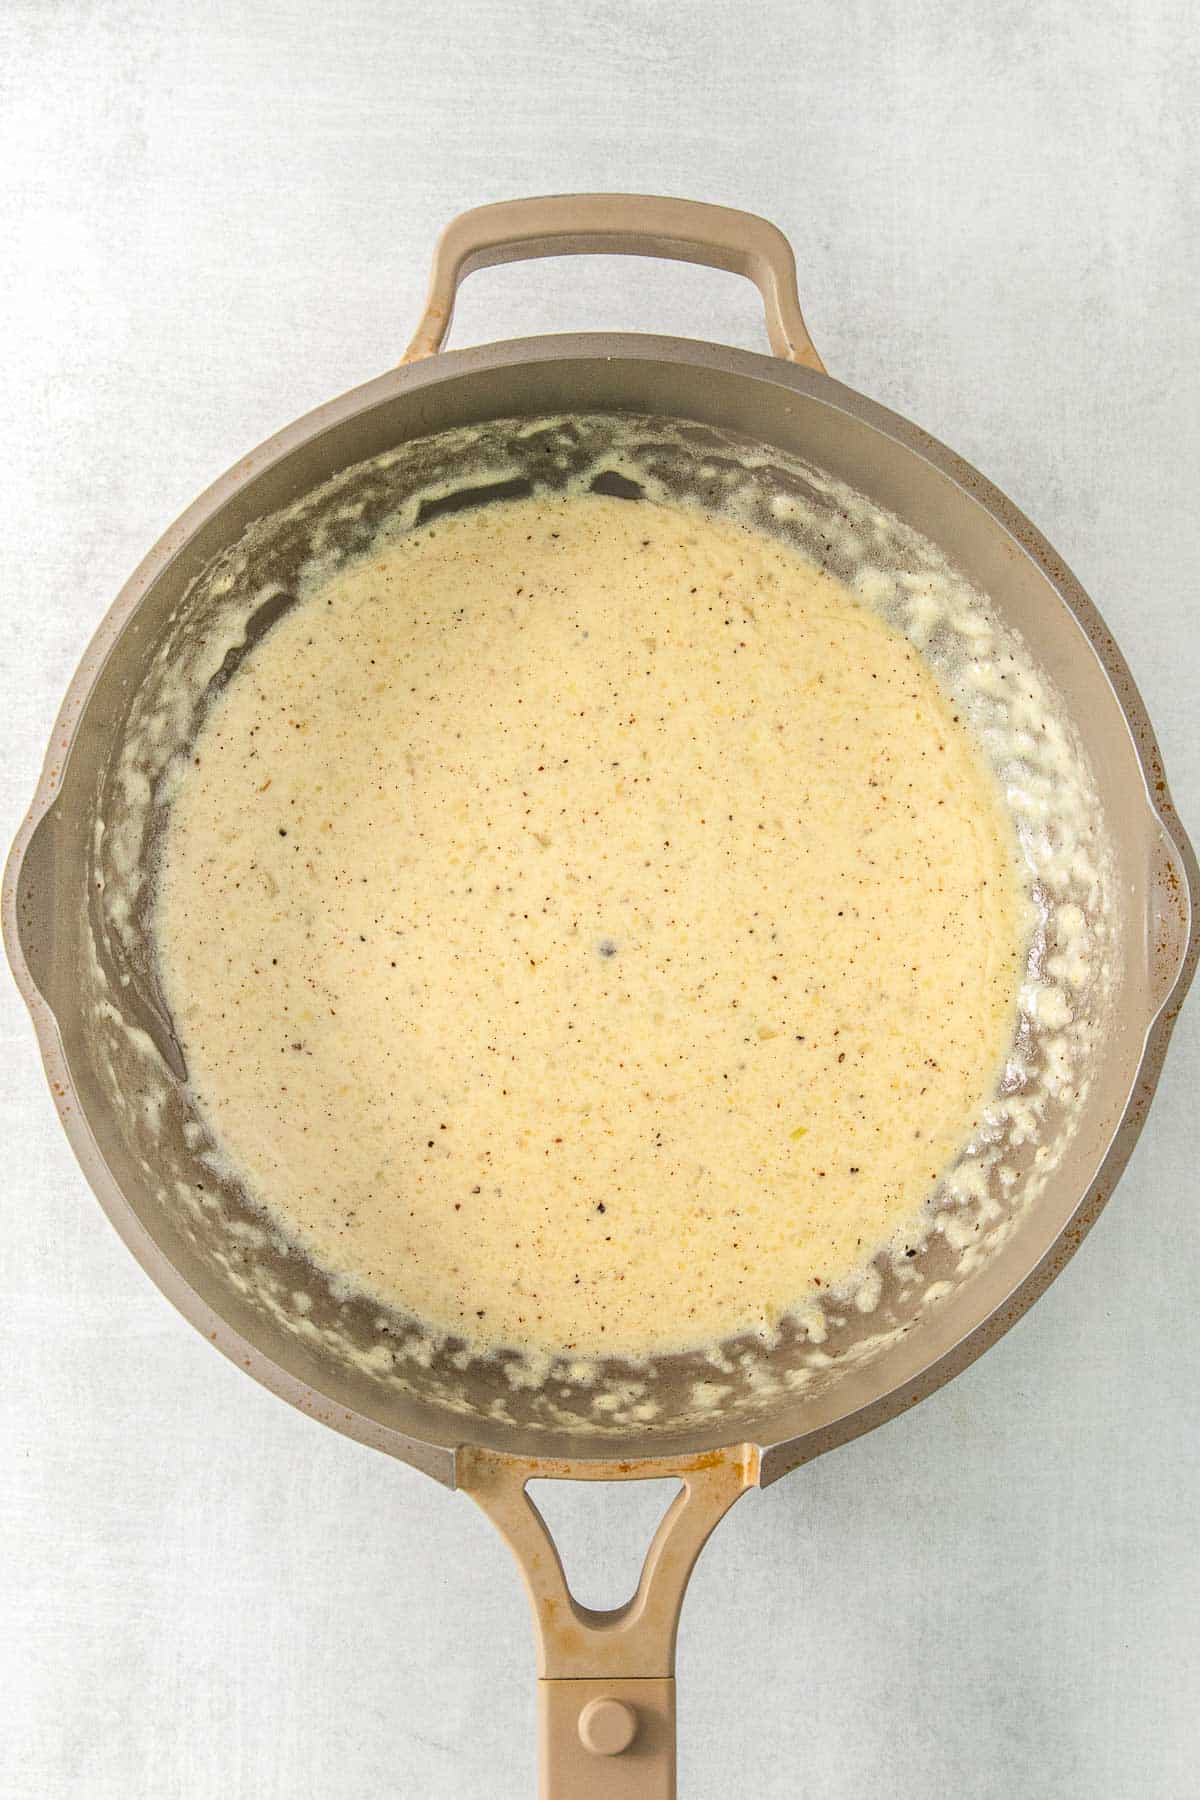 Pepper, nutmeg, and salt added to sauce mixture in saucepan.